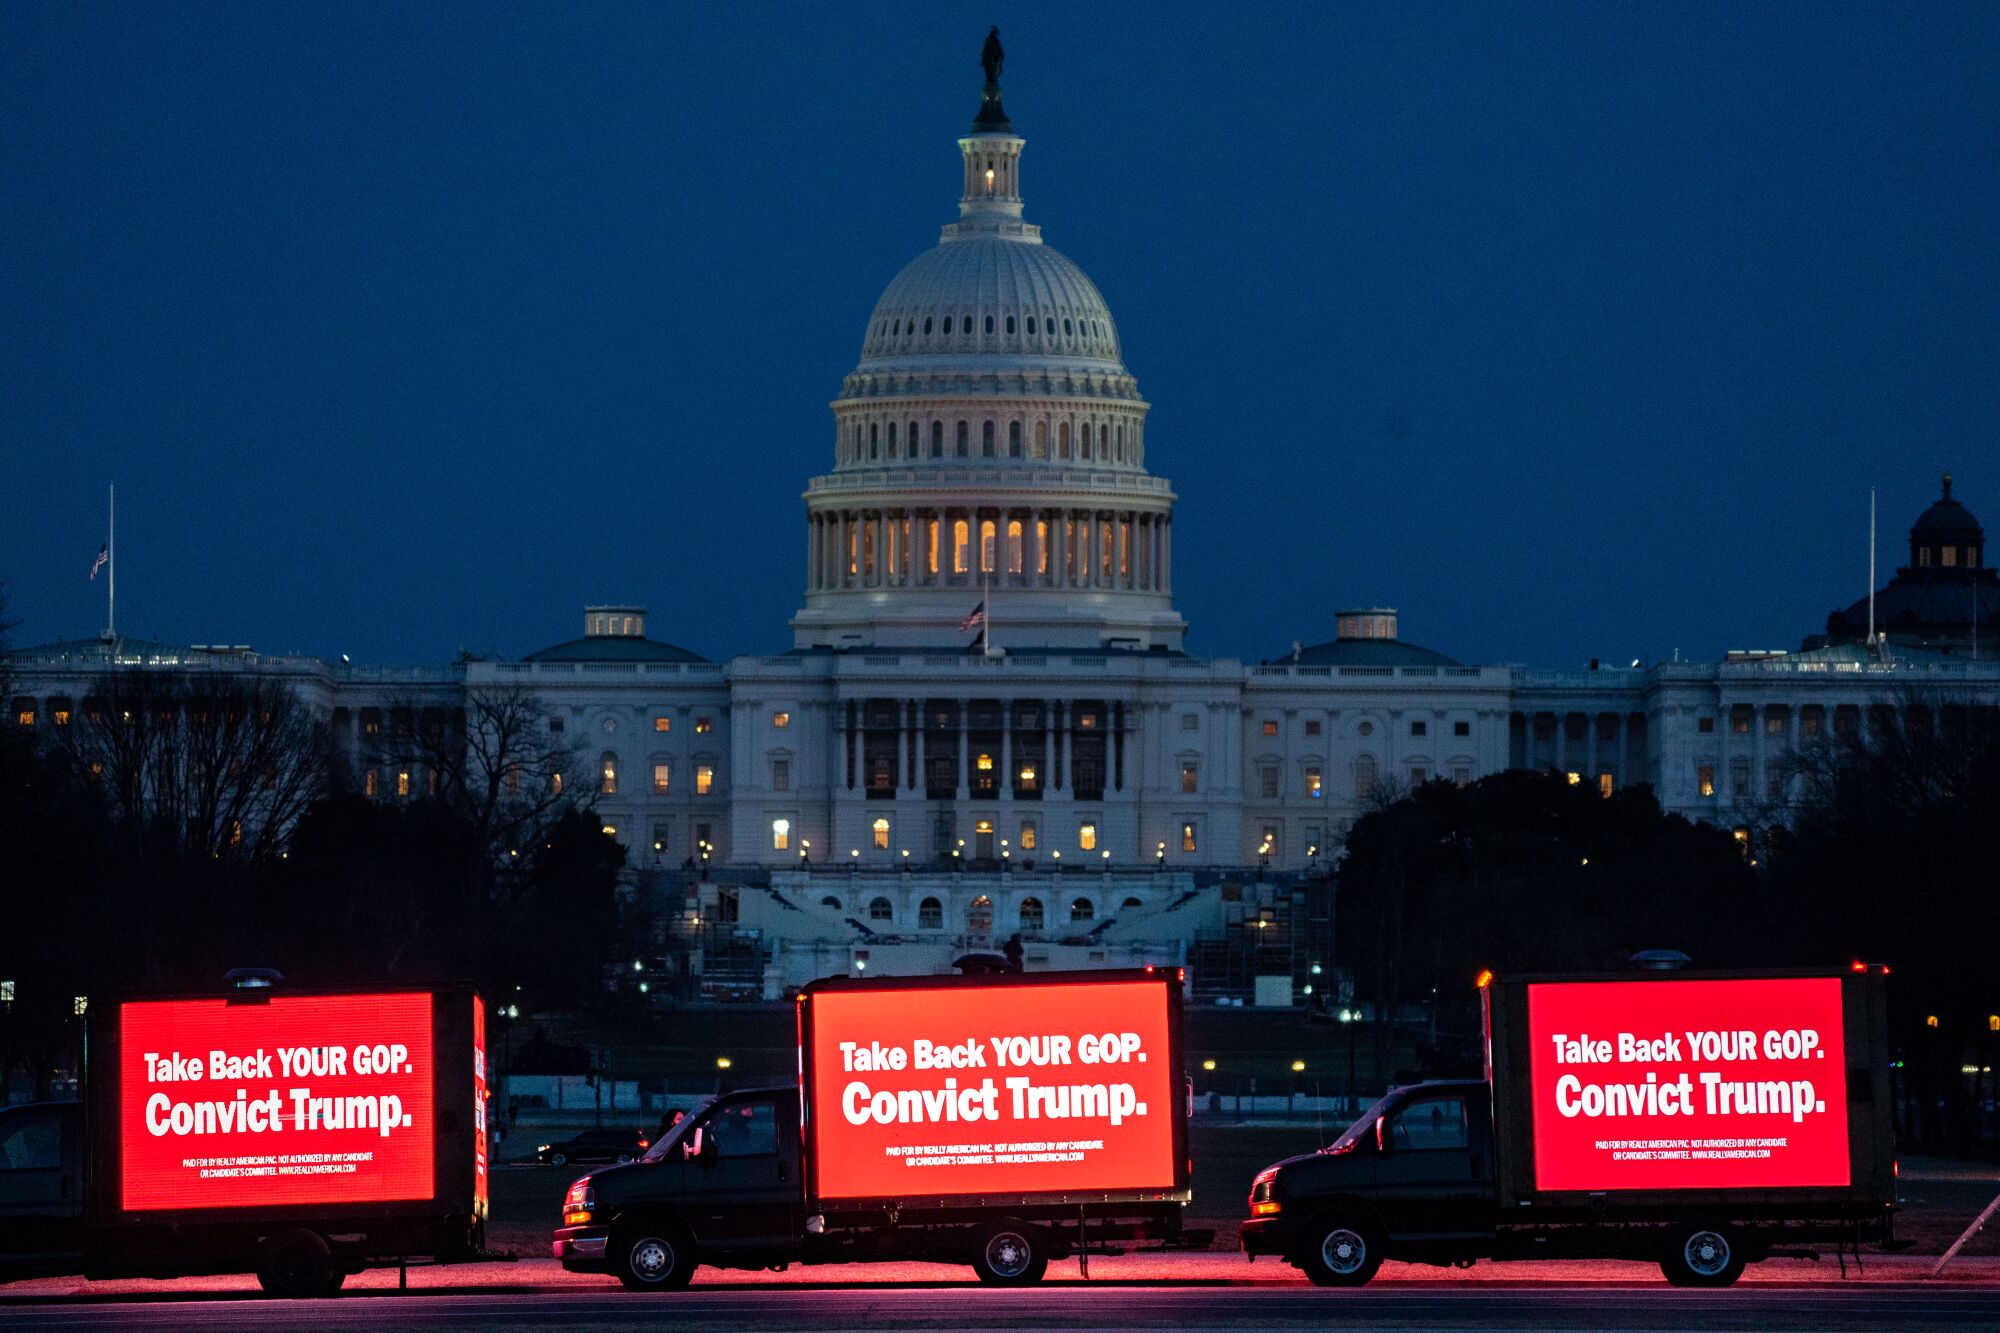 Trucks with LED screens displaying anti-Trump messages near the Capitol Building